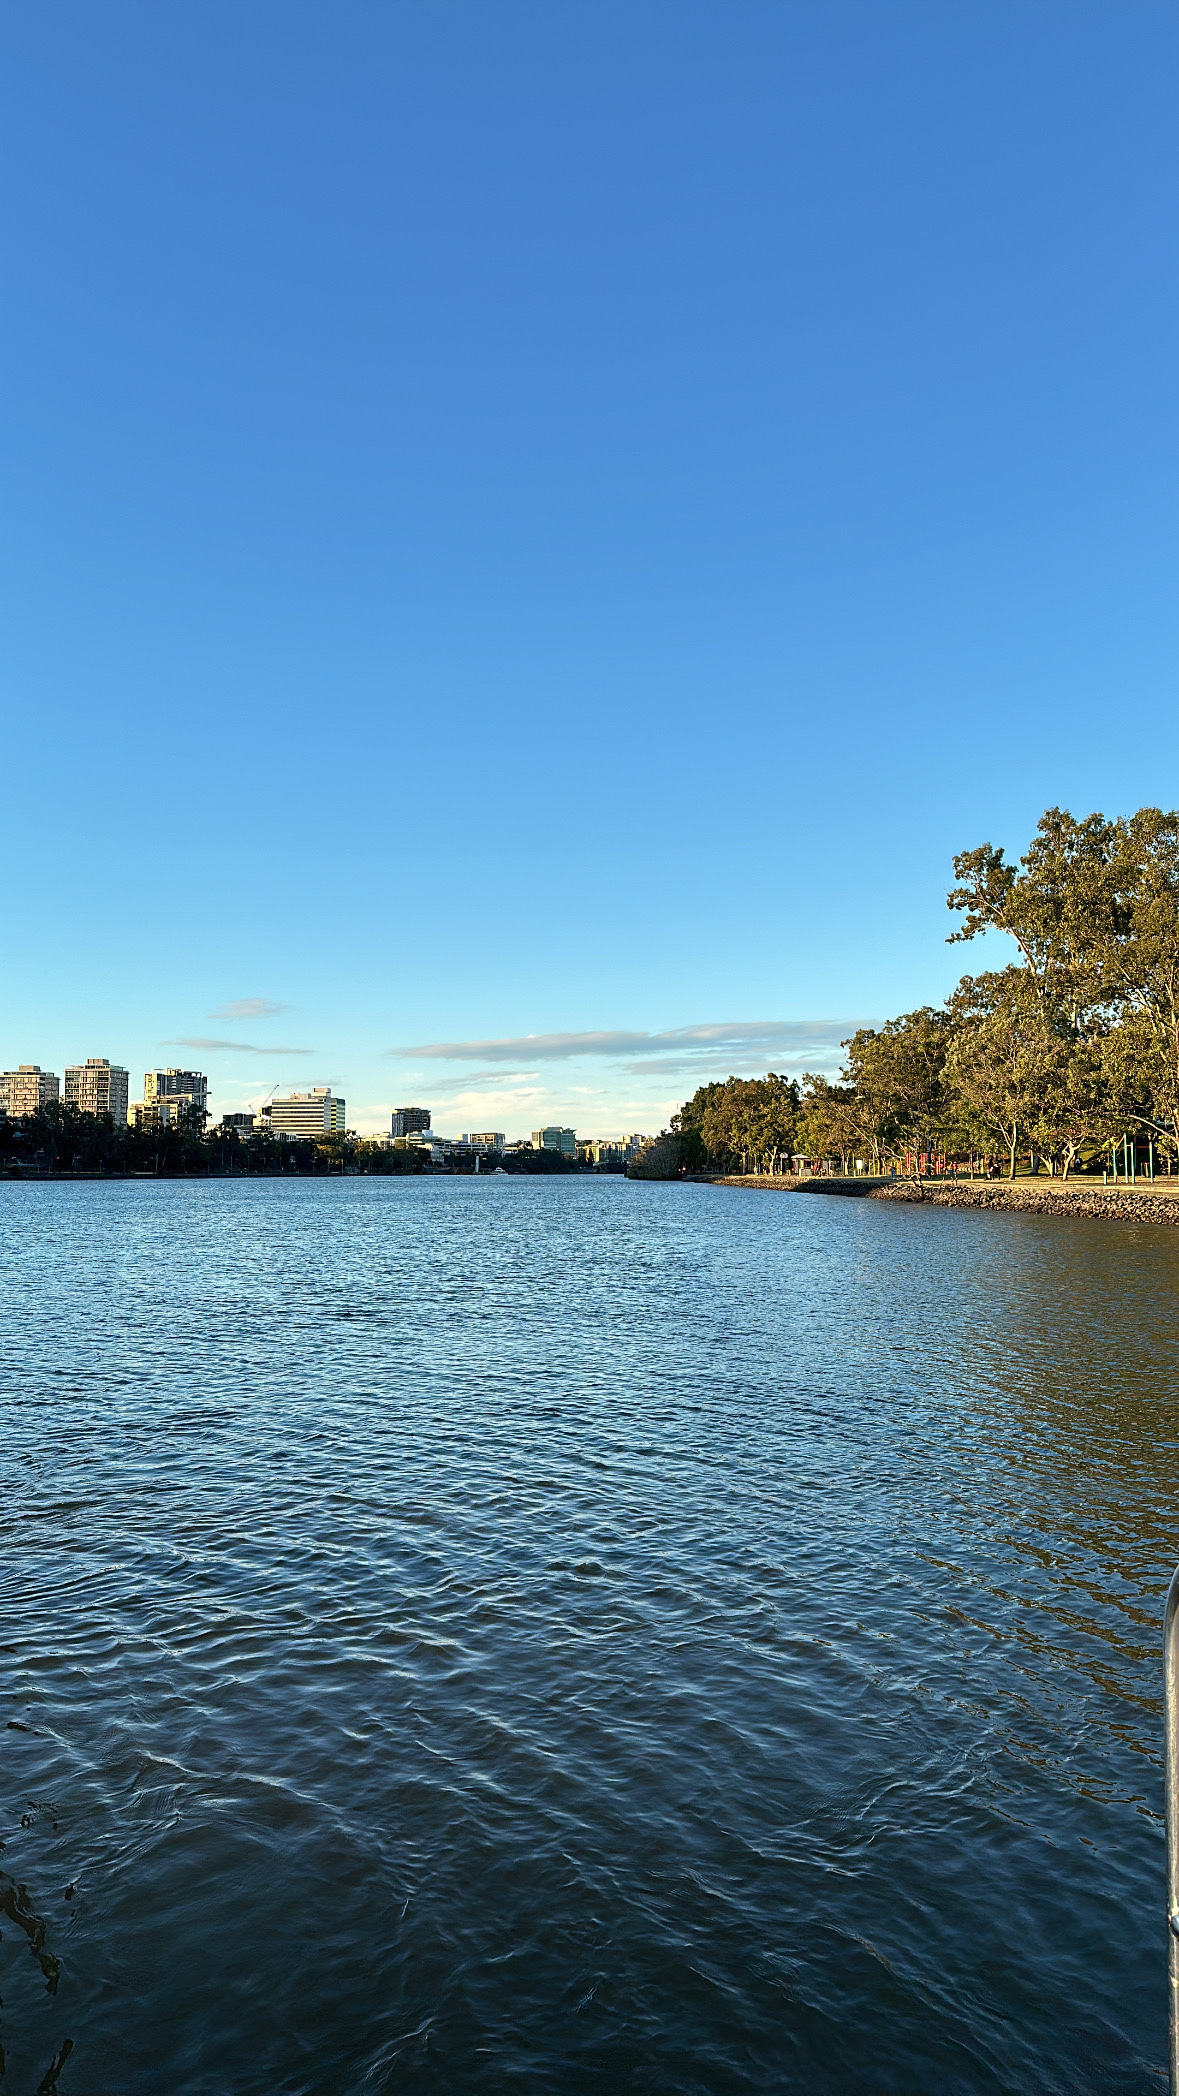 Looking along the Brisbane River. The lower half of the photo is the blue of the river. The curve of the river creates a thin band of land across the middle with the upper half a clear blue sky.